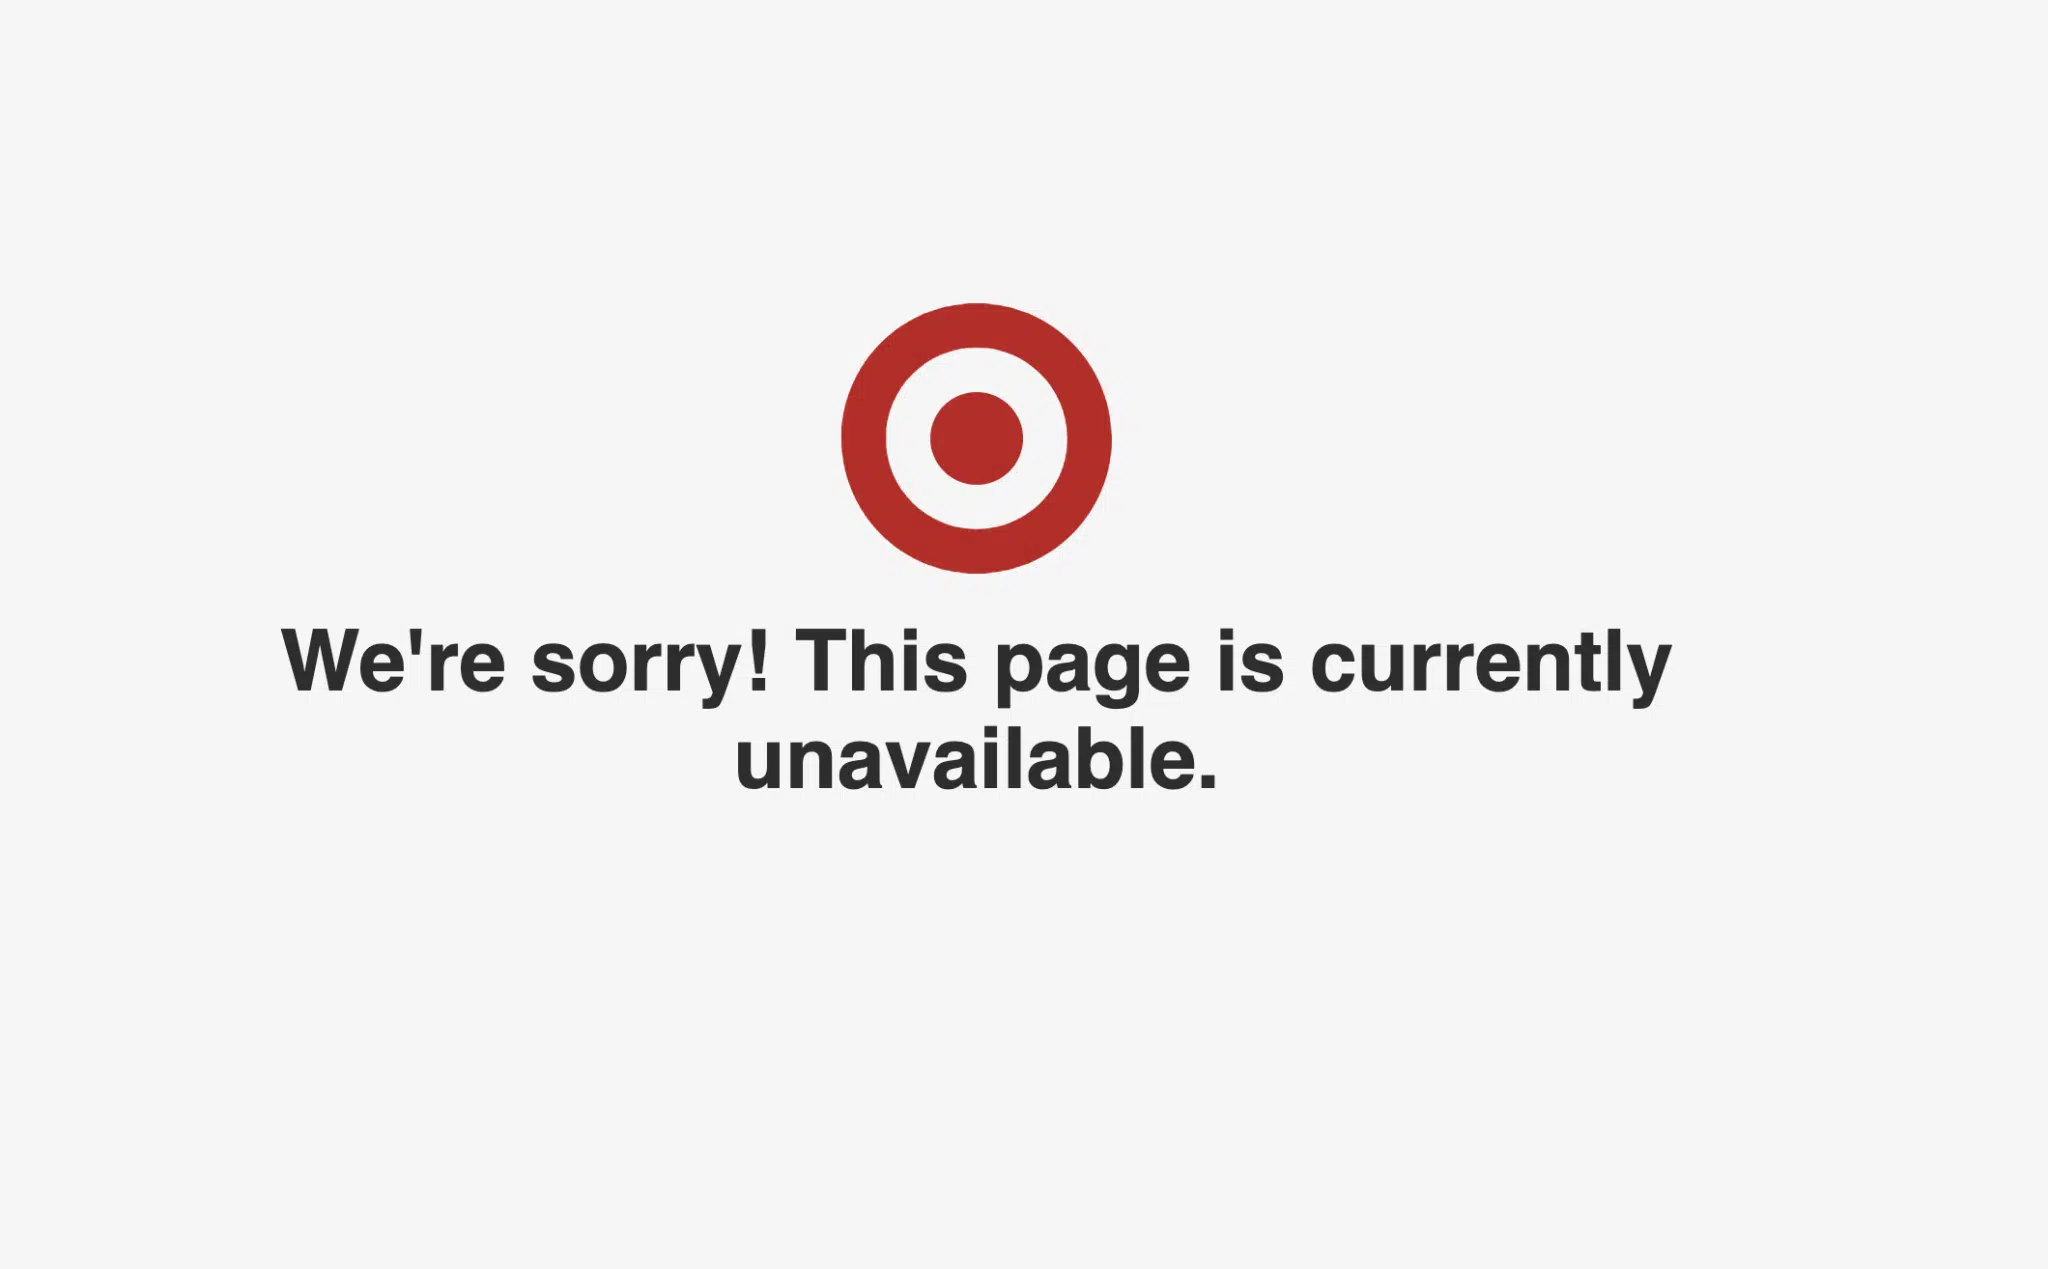 Target 404 page